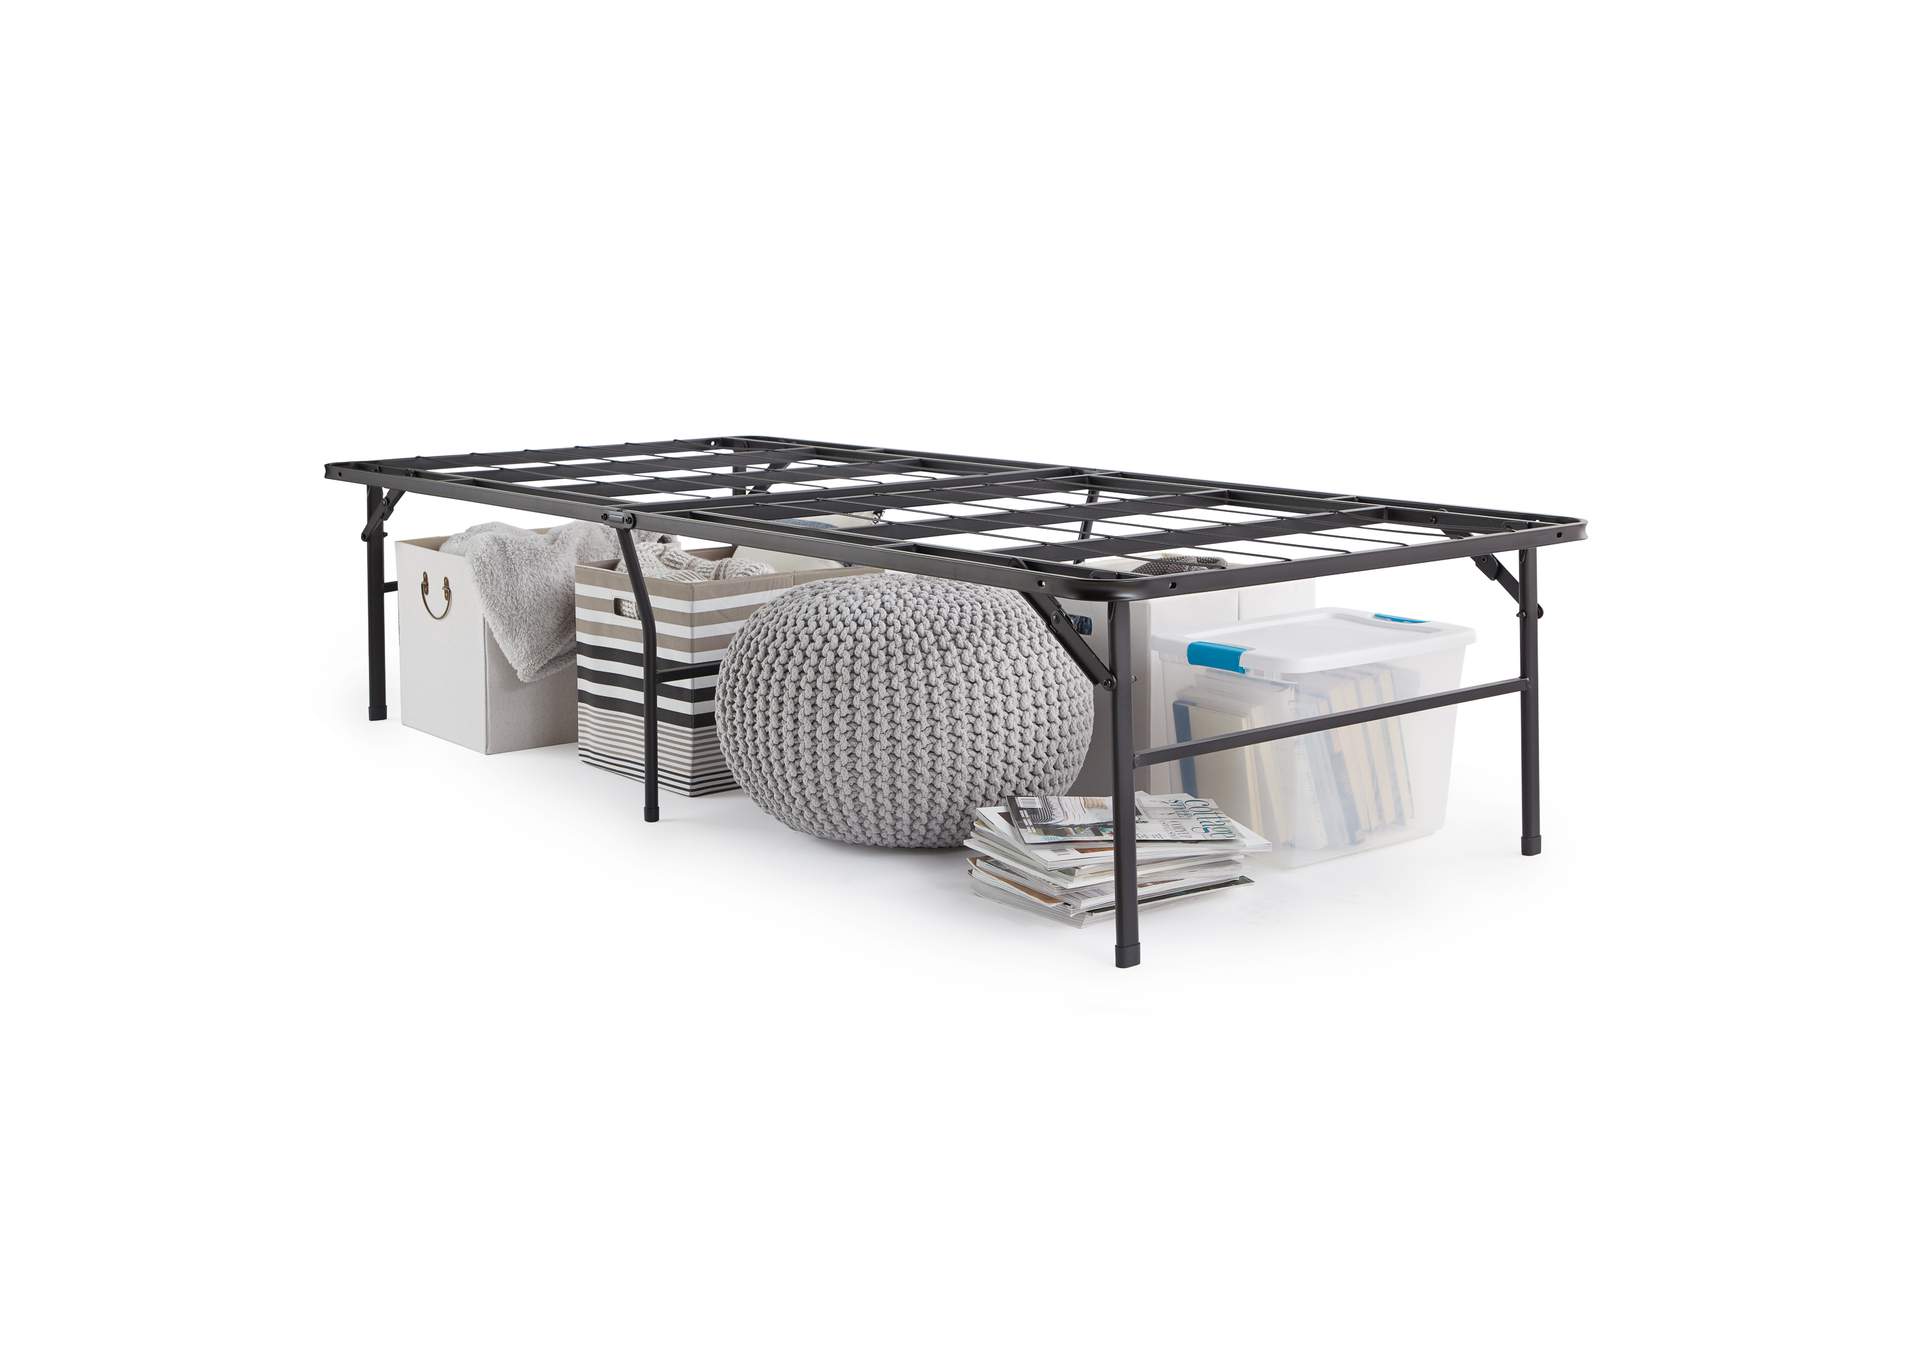 Malouf Structures Highrise HD Bed 18" Frame - California King Size,Malouf